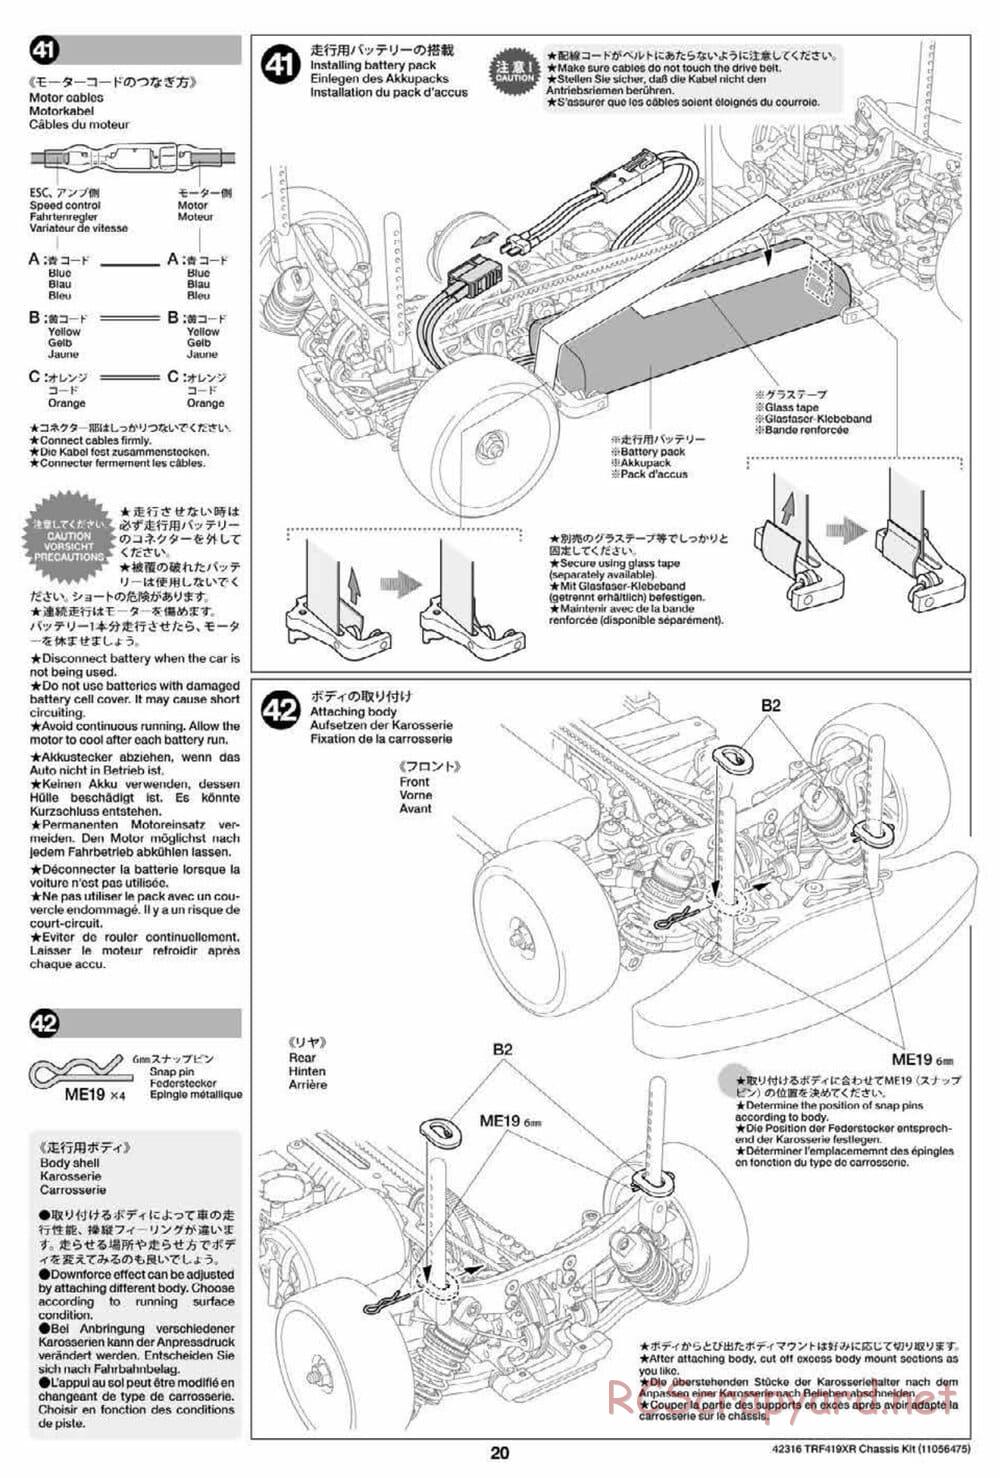 Tamiya - TRF419XR Chassis - Manual - Page 20